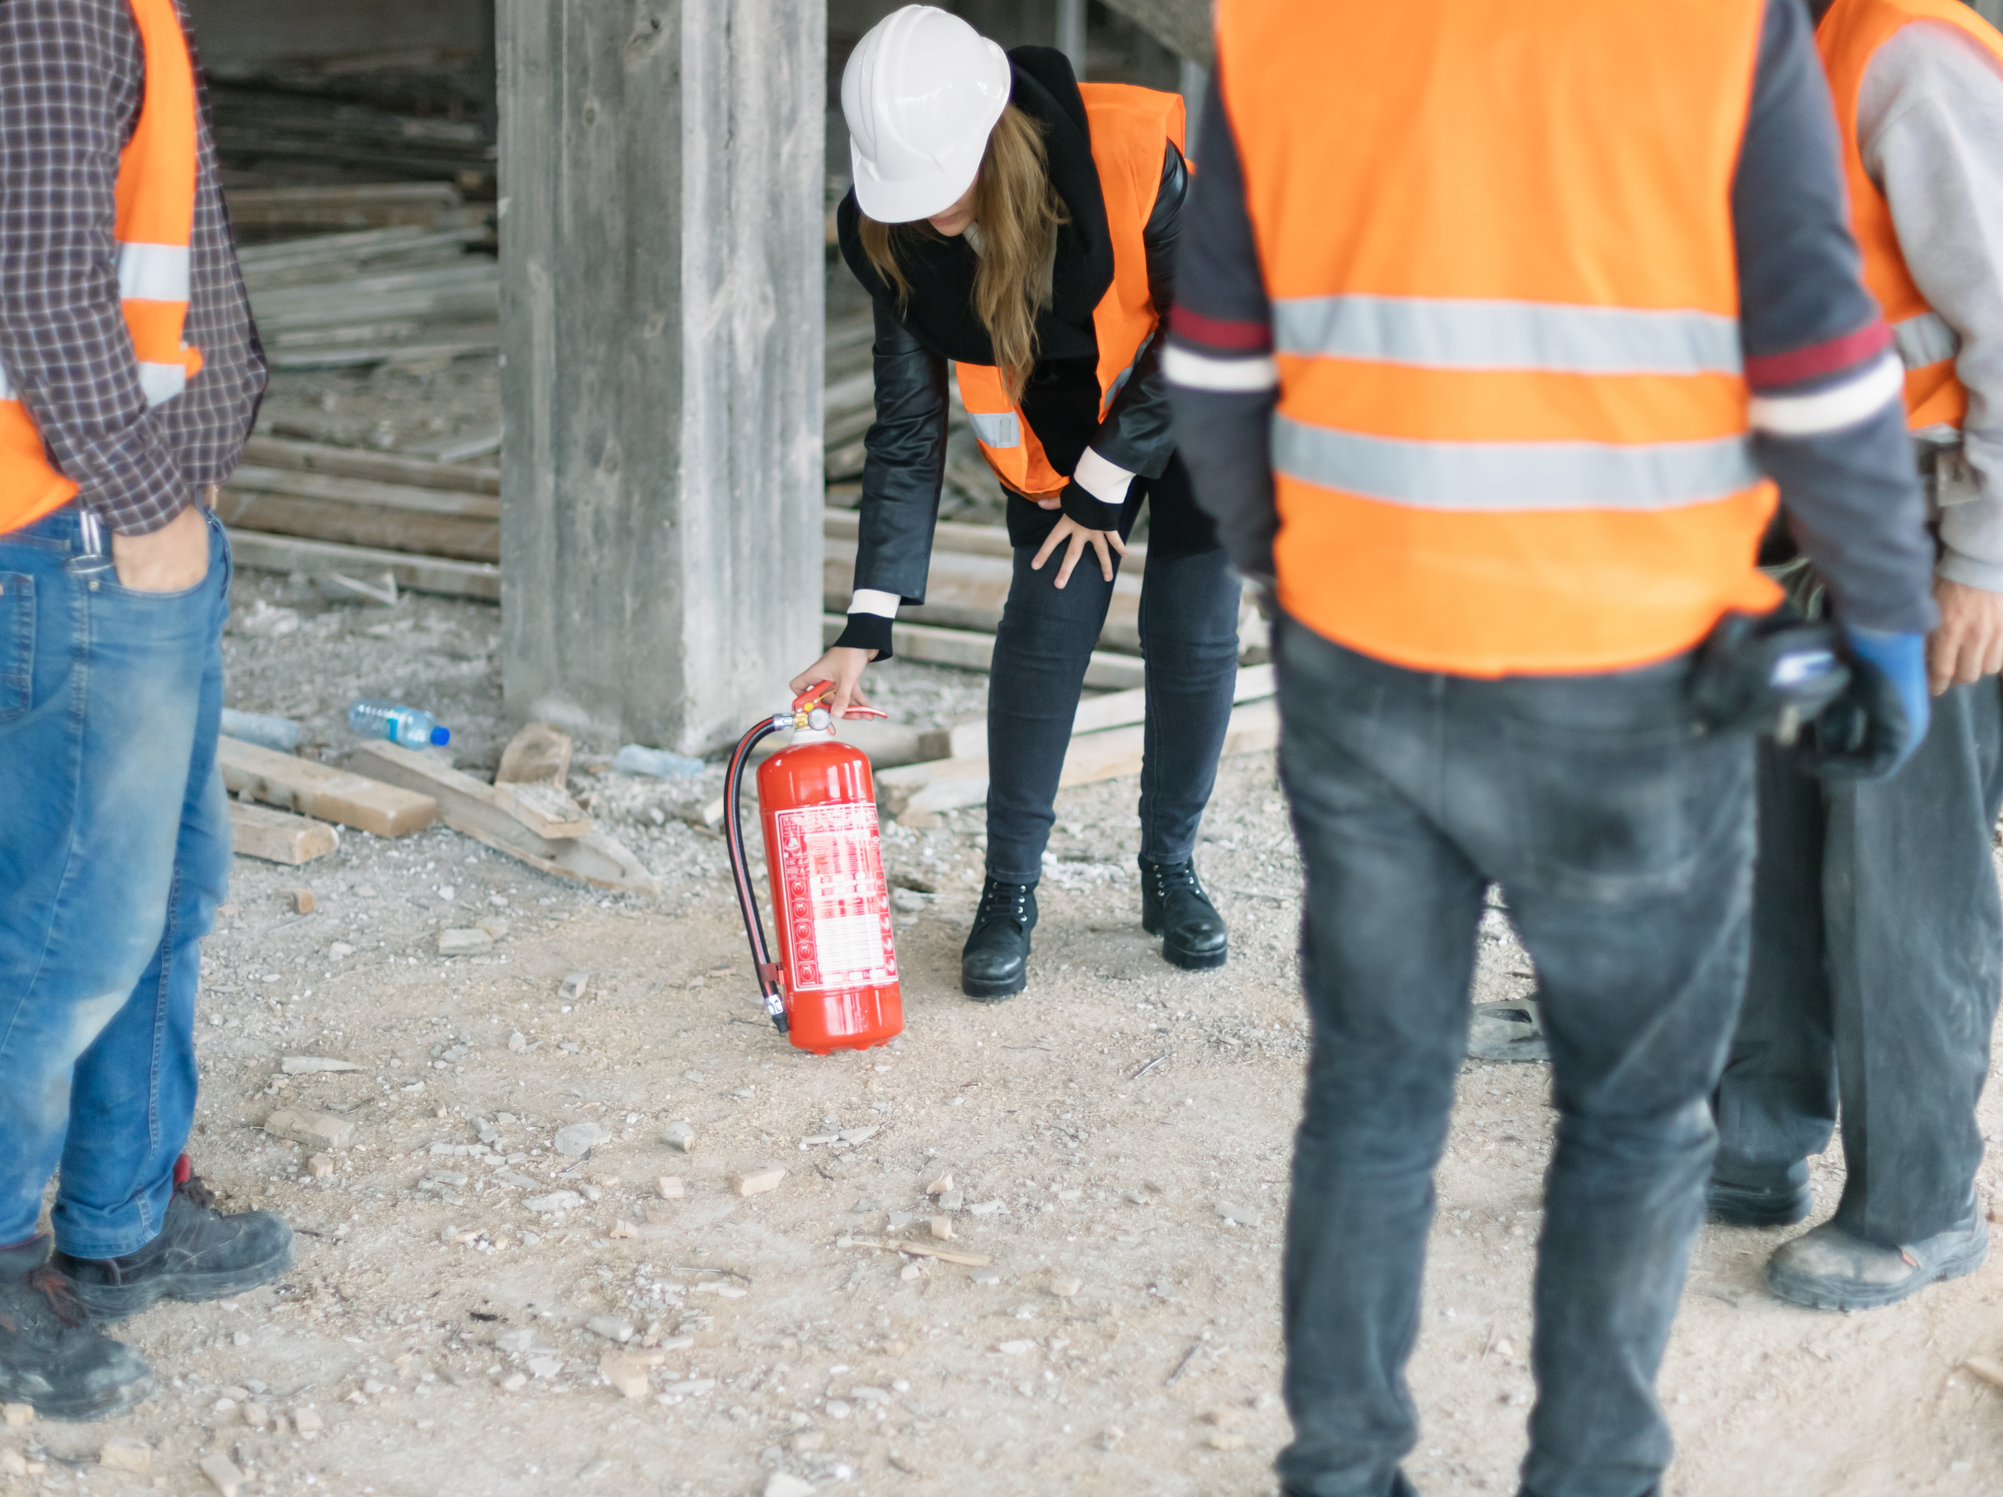 Female specialist explaining how to use fire extinguisher on construction site